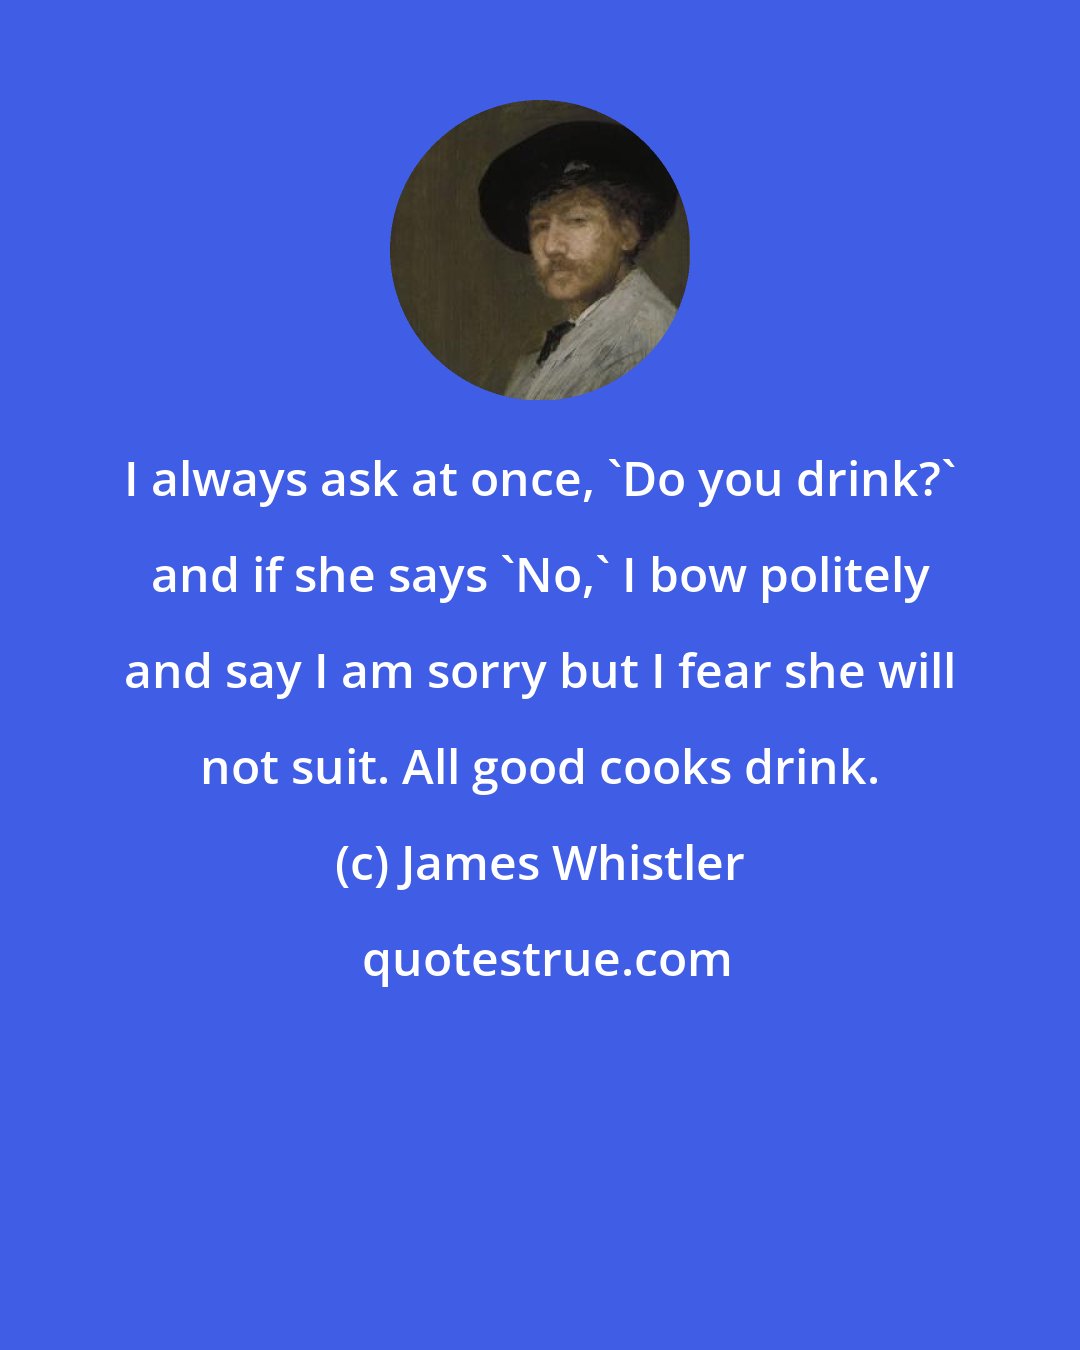 James Whistler: I always ask at once, 'Do you drink?' and if she says 'No,' I bow politely and say I am sorry but I fear she will not suit. All good cooks drink.